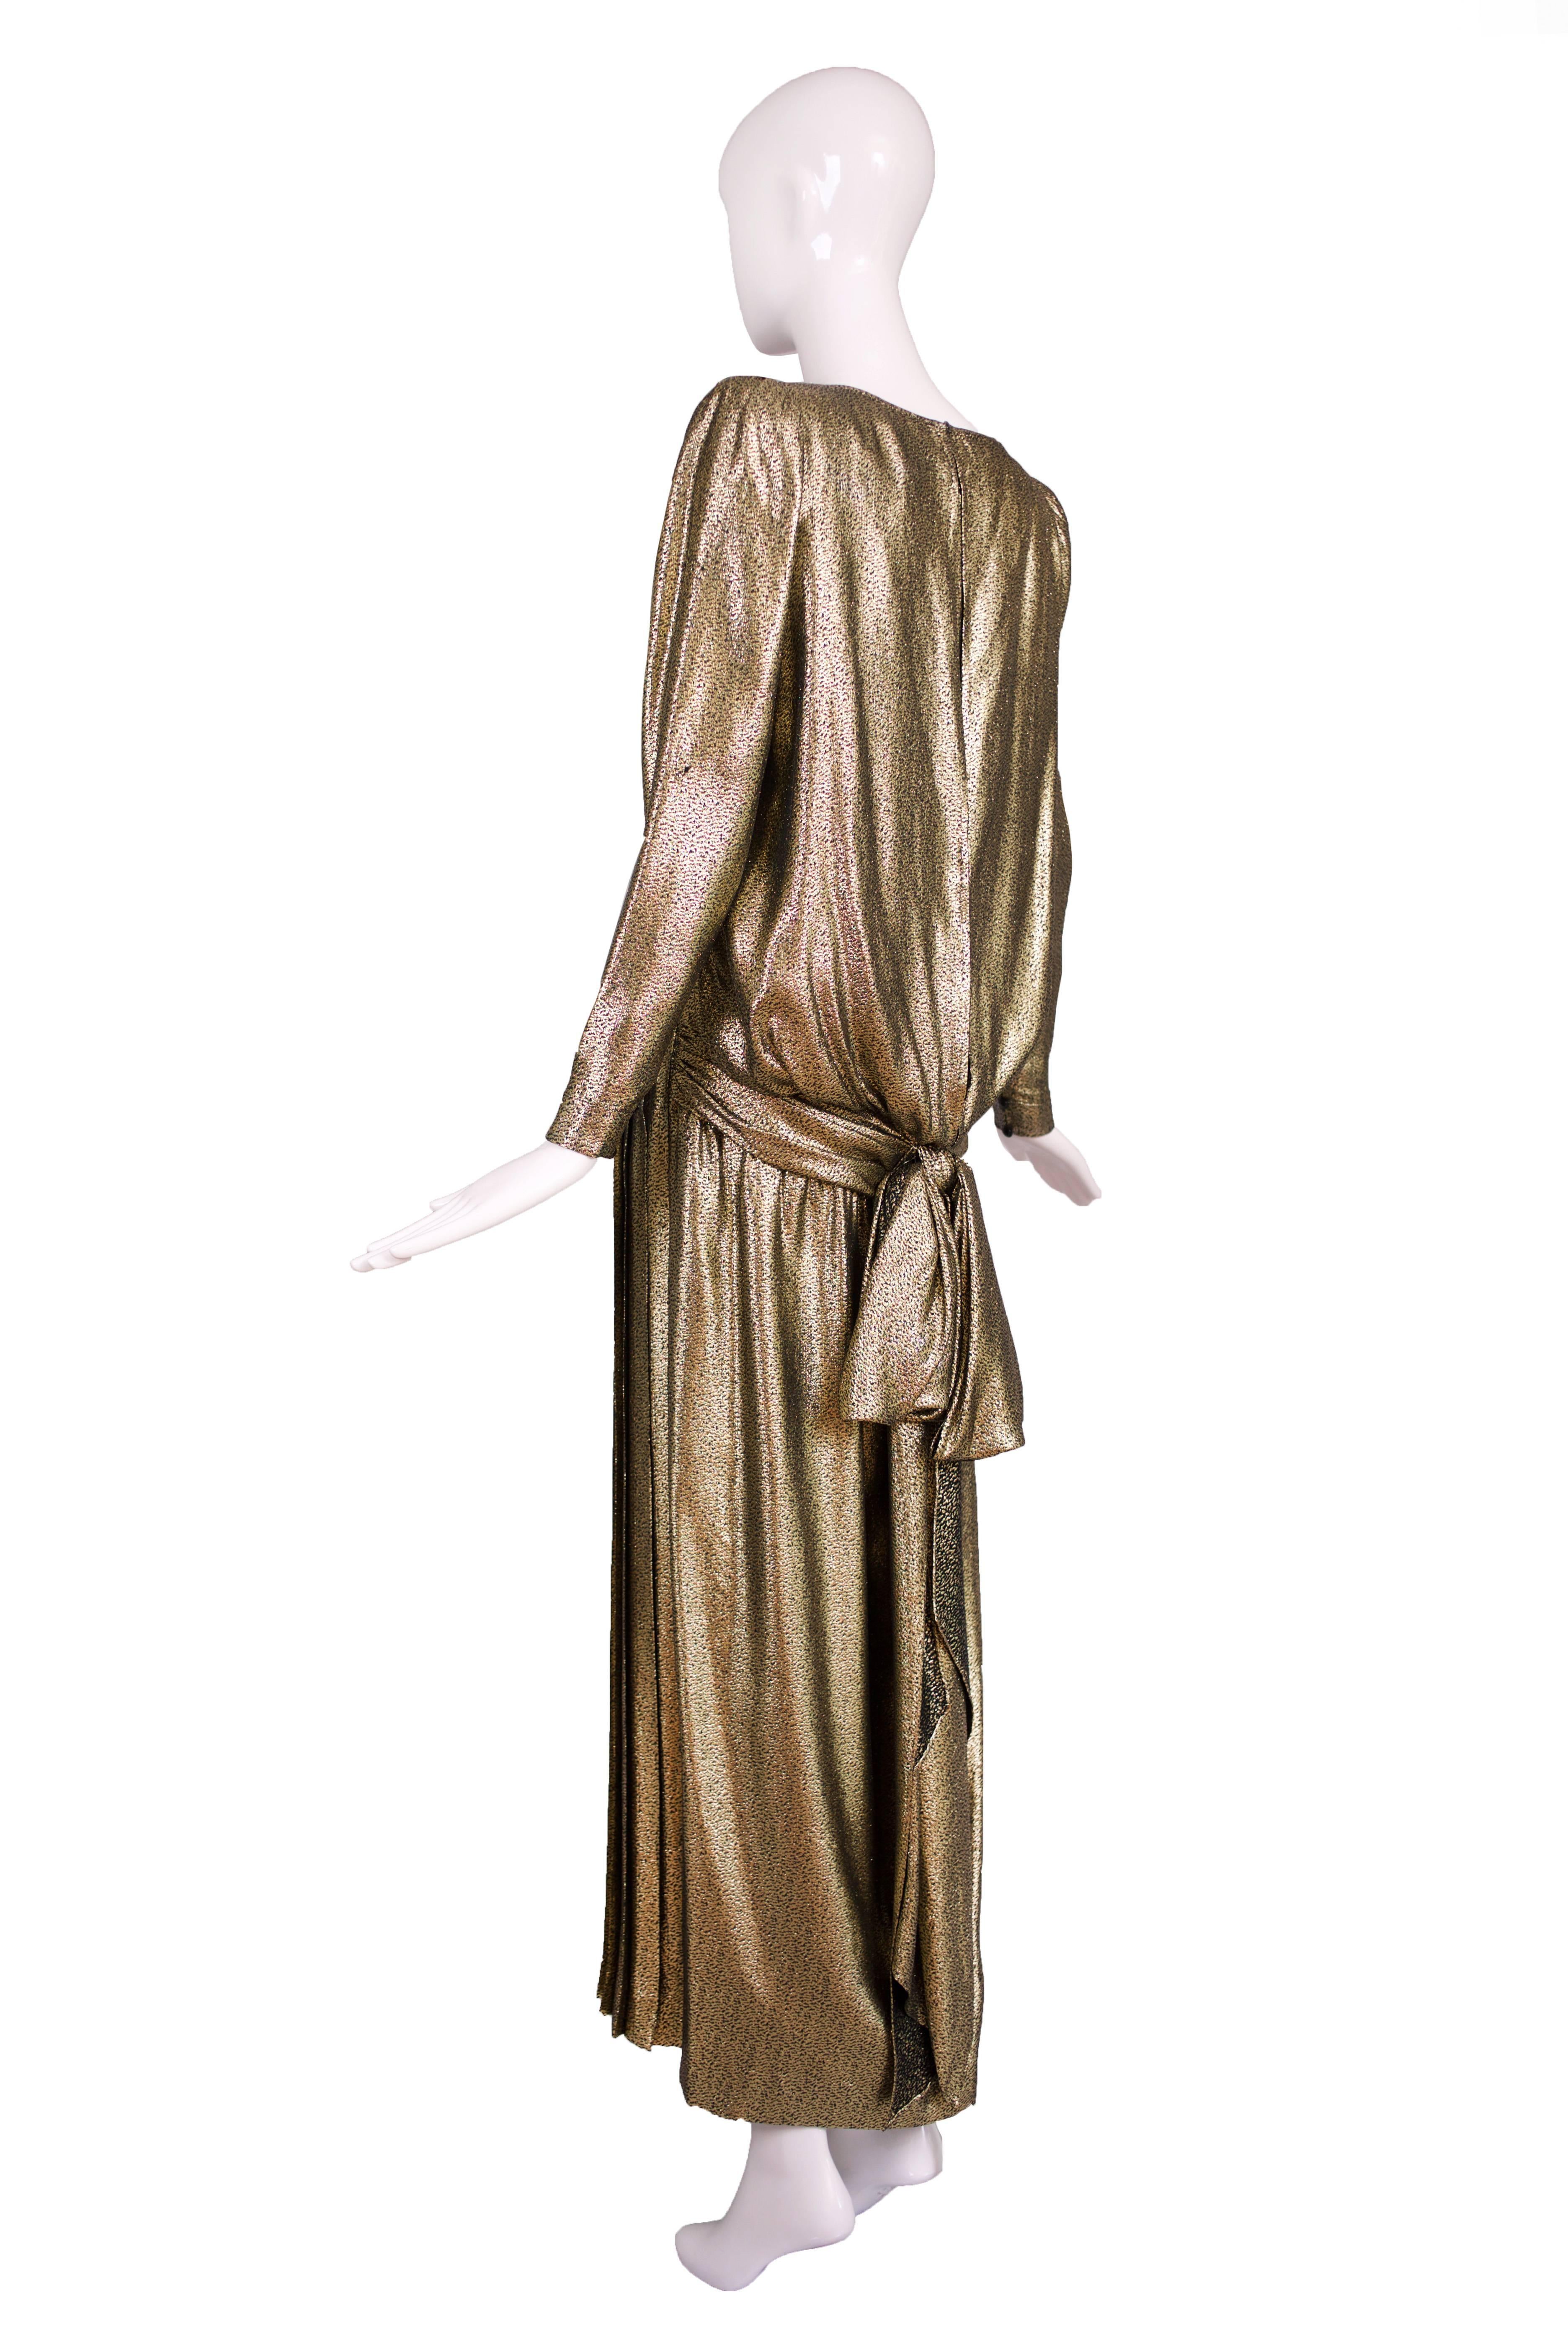 A 1980's Valentino Boutique label gold lame gown with a dropped waist, knife-pleated skirt and an oversized, draped bow at the back. Lined with organza. In very good to excellent condition with one tiny area of wear to the fabric of the left sleeve